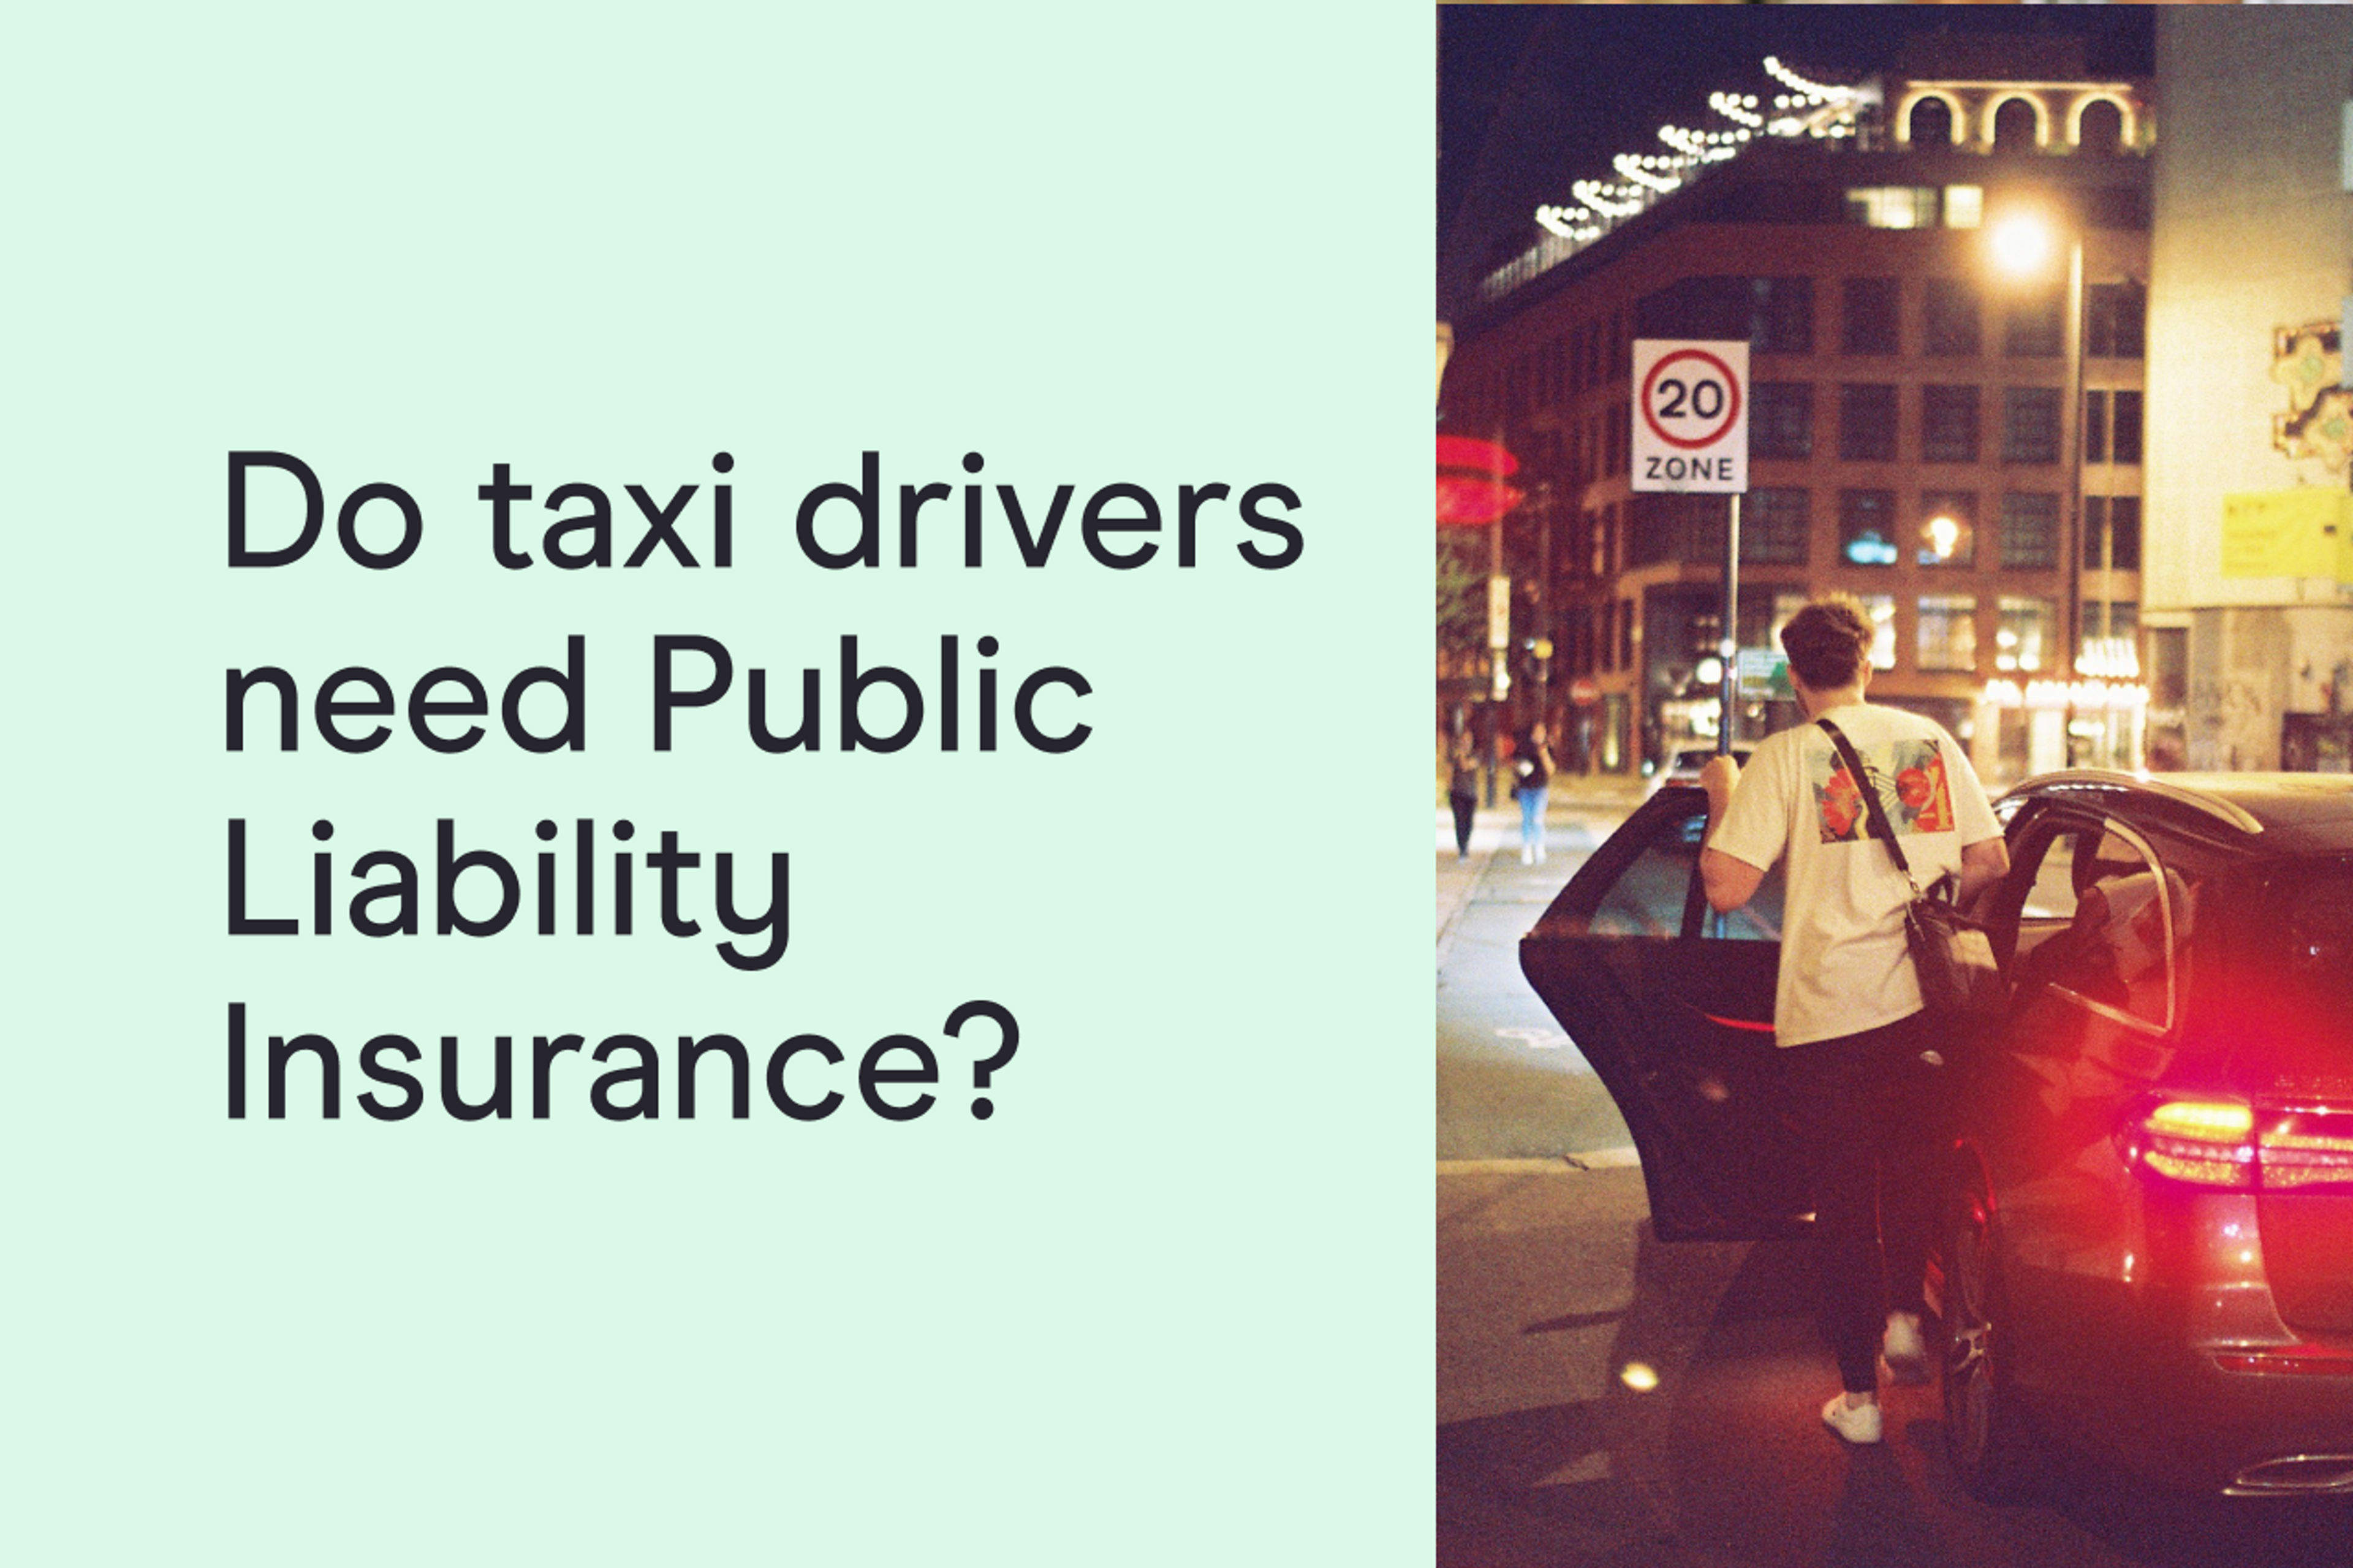 taxi driver public liability insurance blog featured image zego